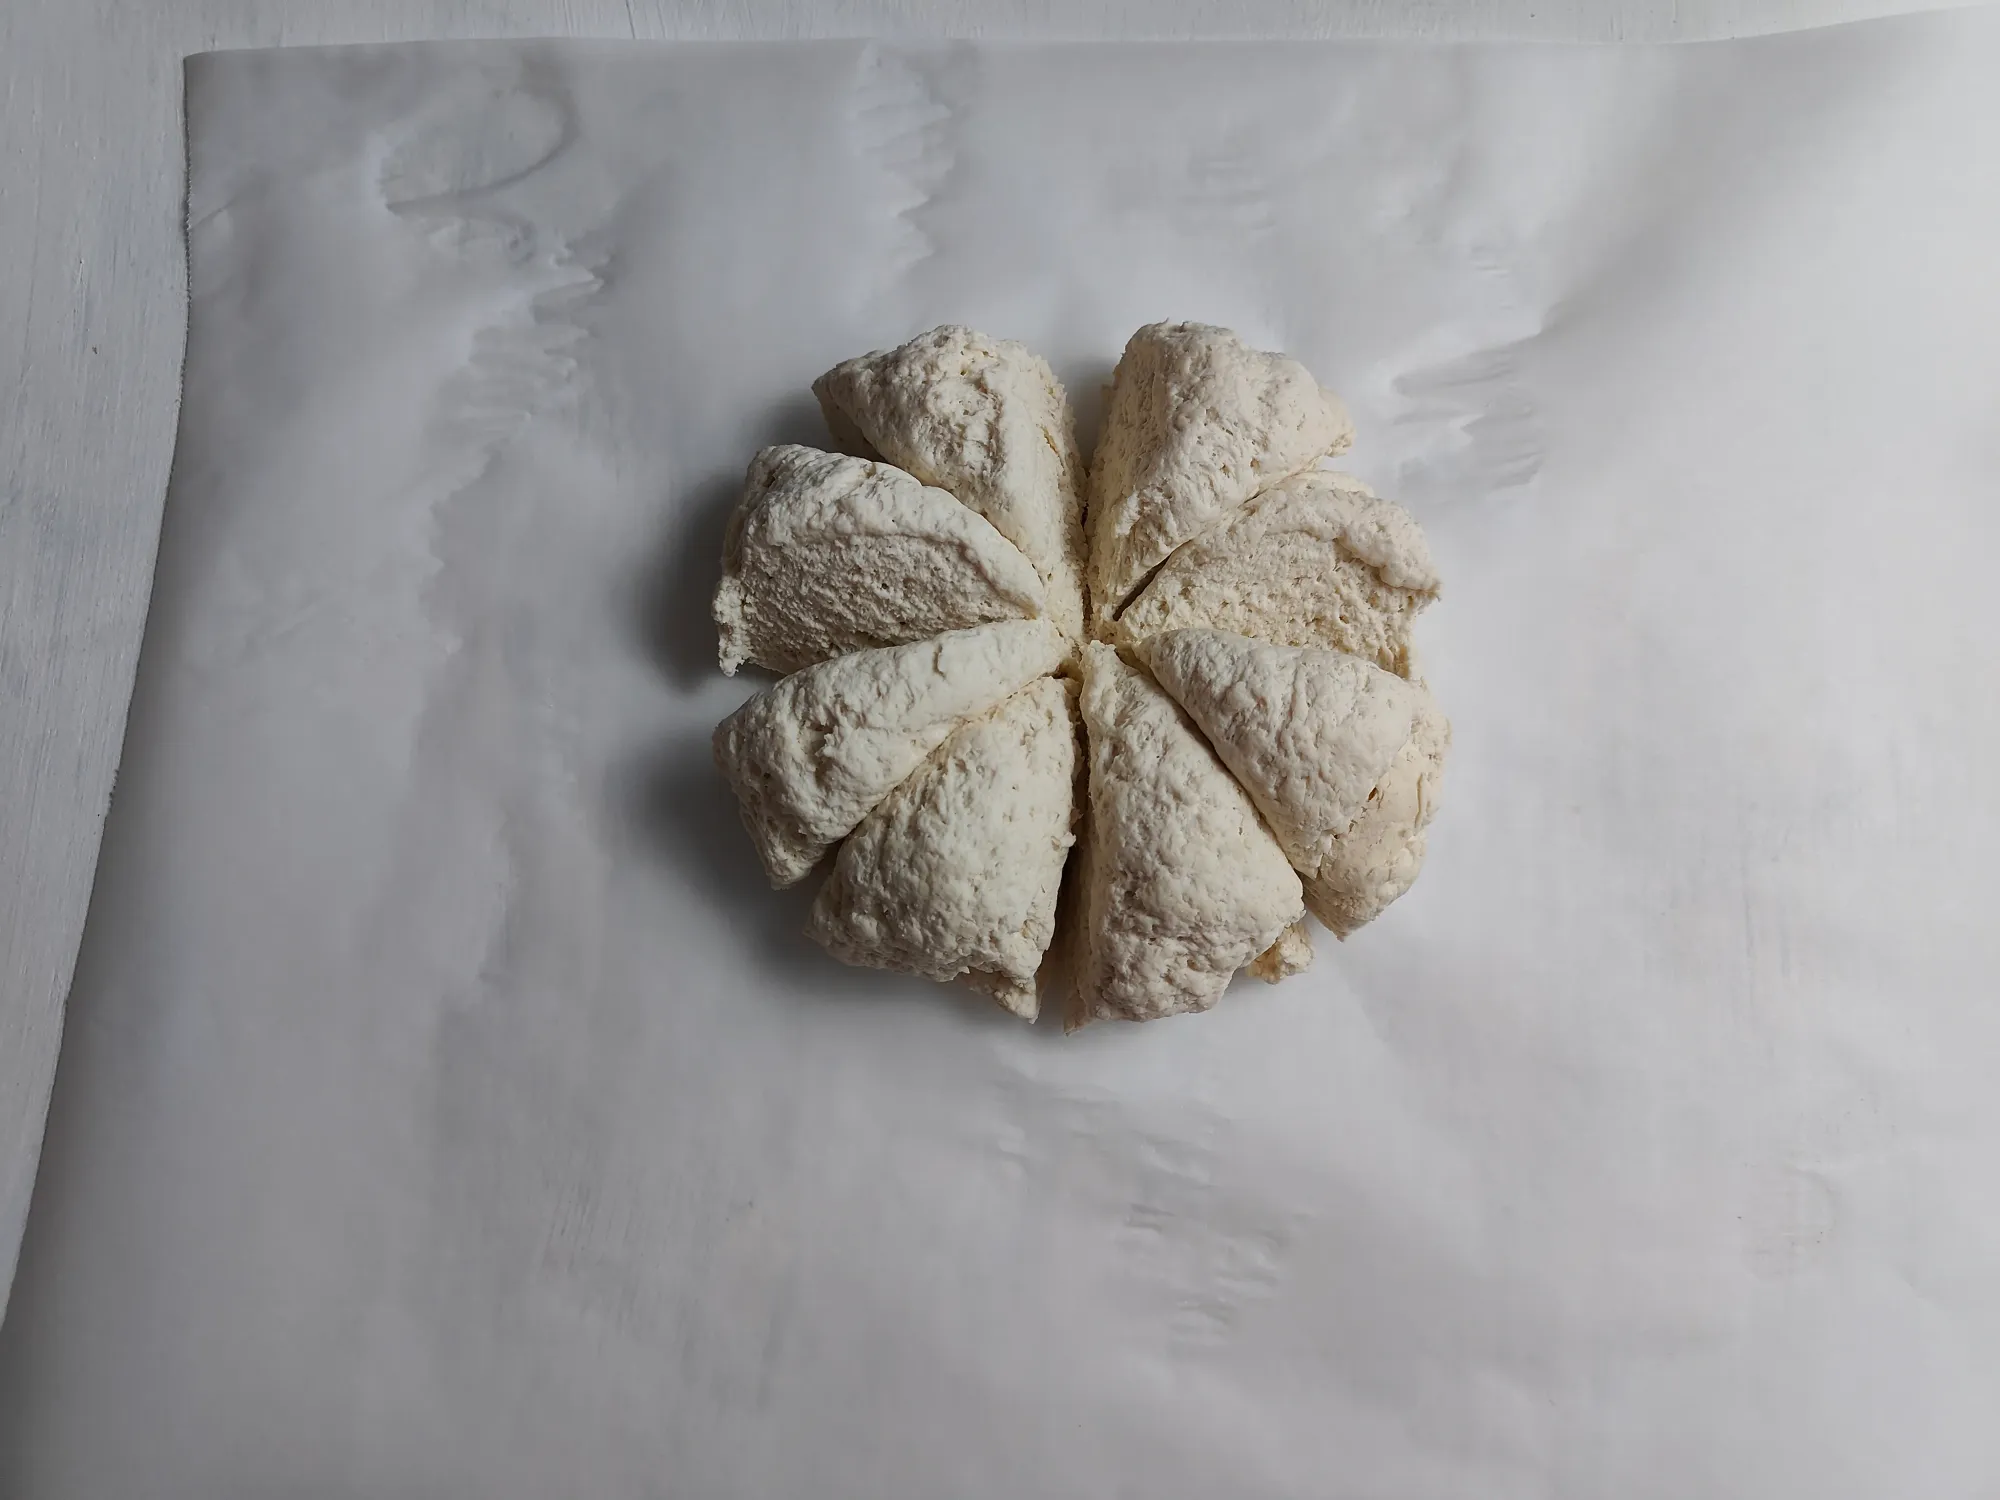 A bread dough ball divided into 8 wedges